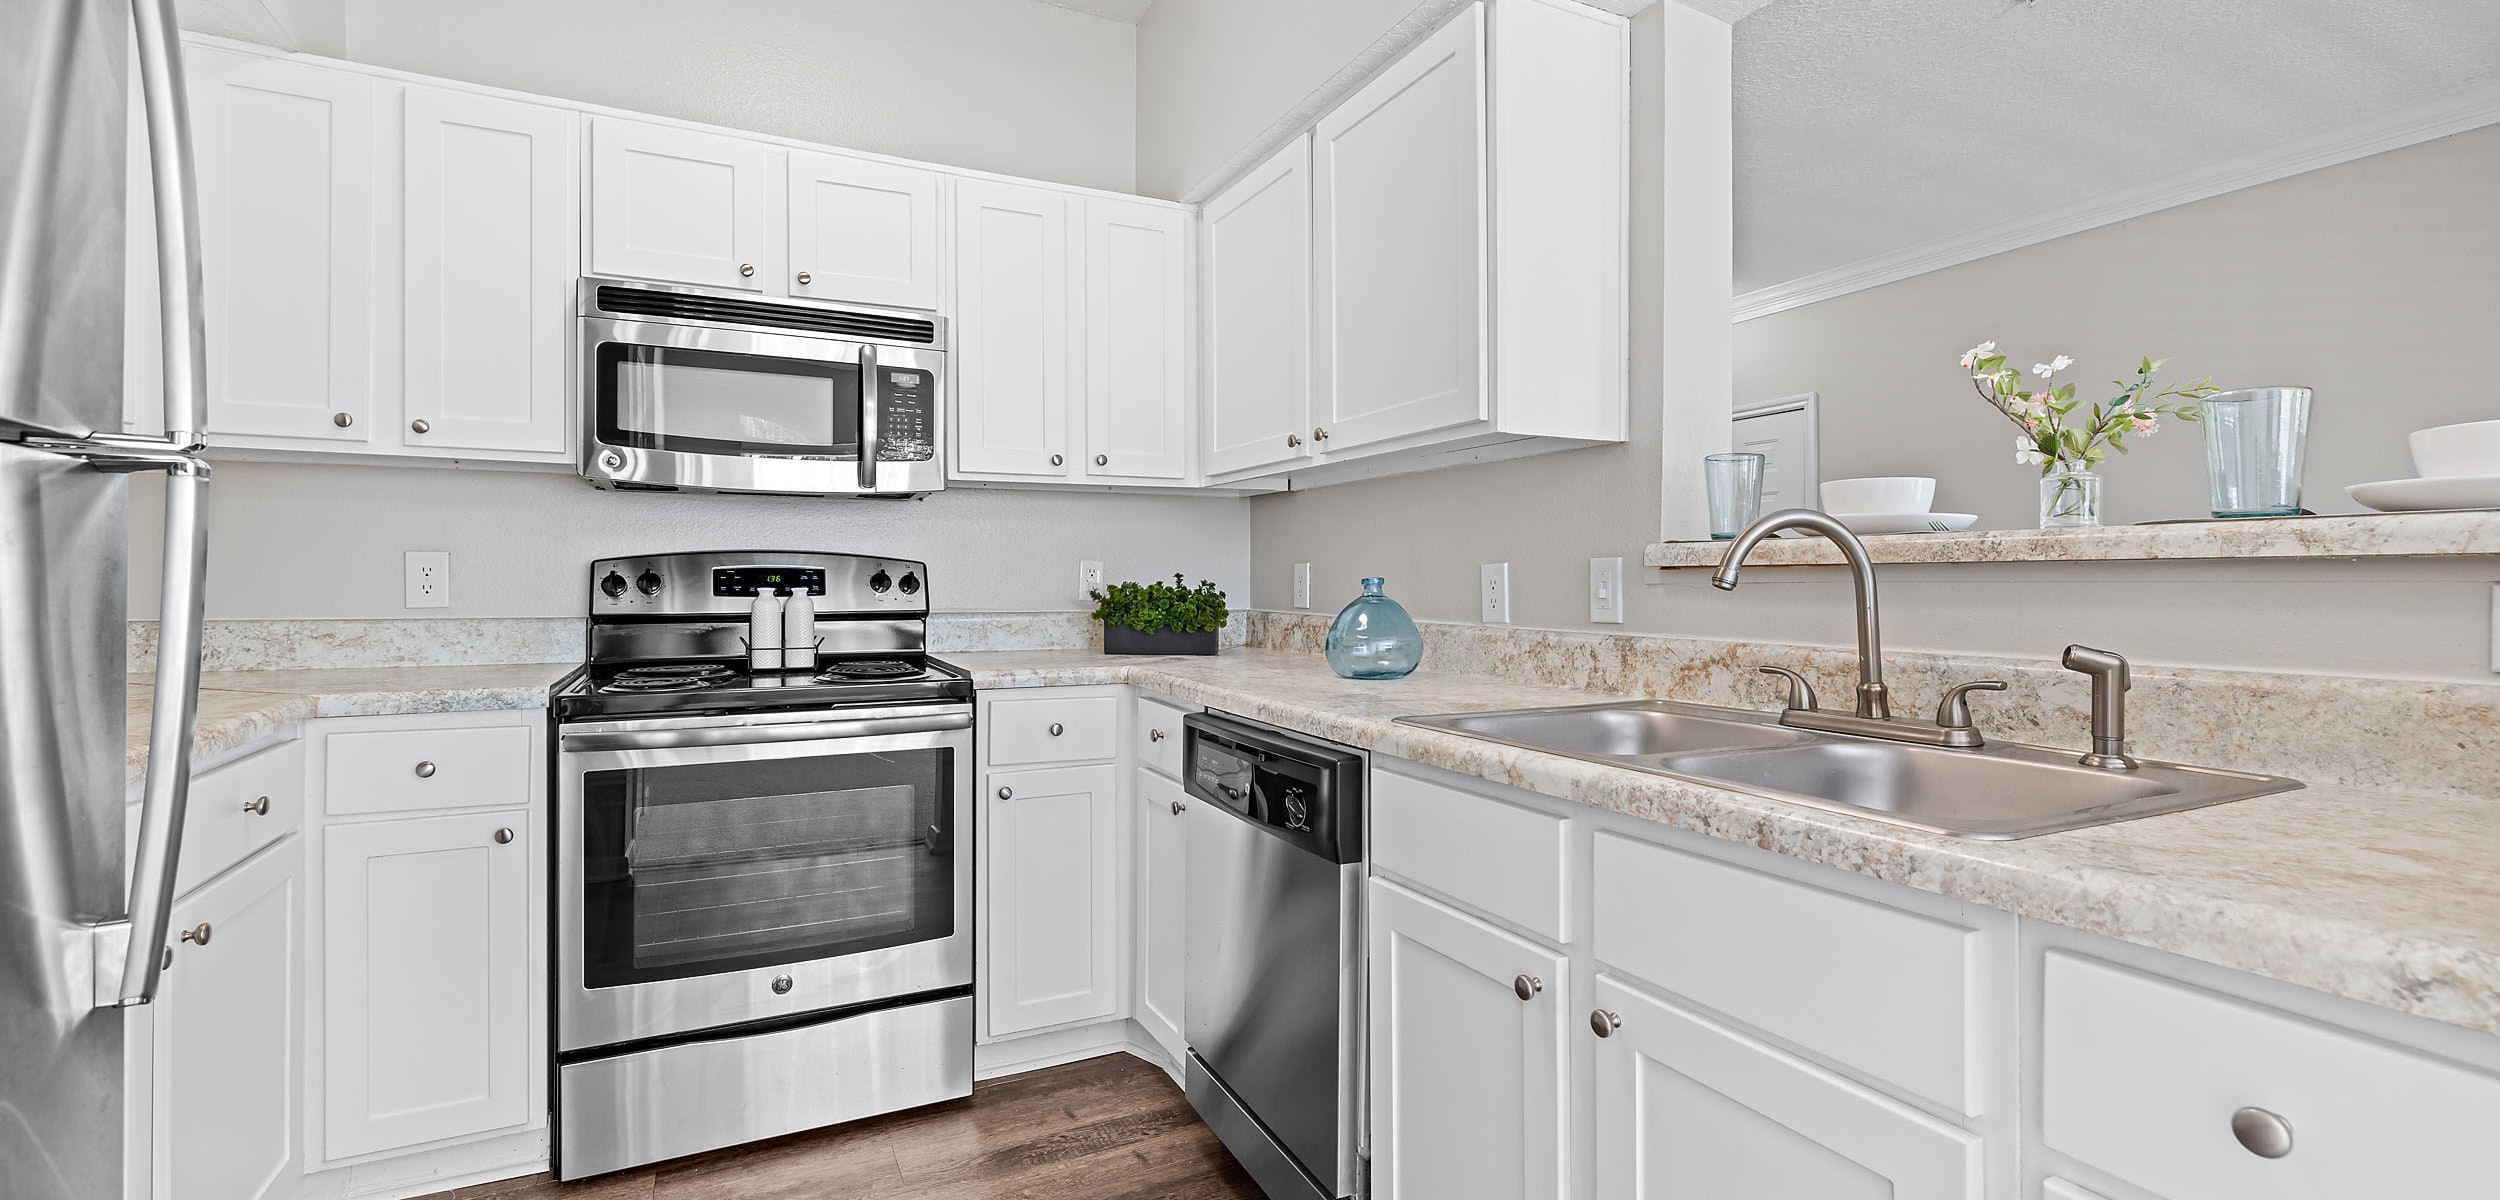 Kitchen with modern appliances at Marquis at Silverton in Cary, North Carolina